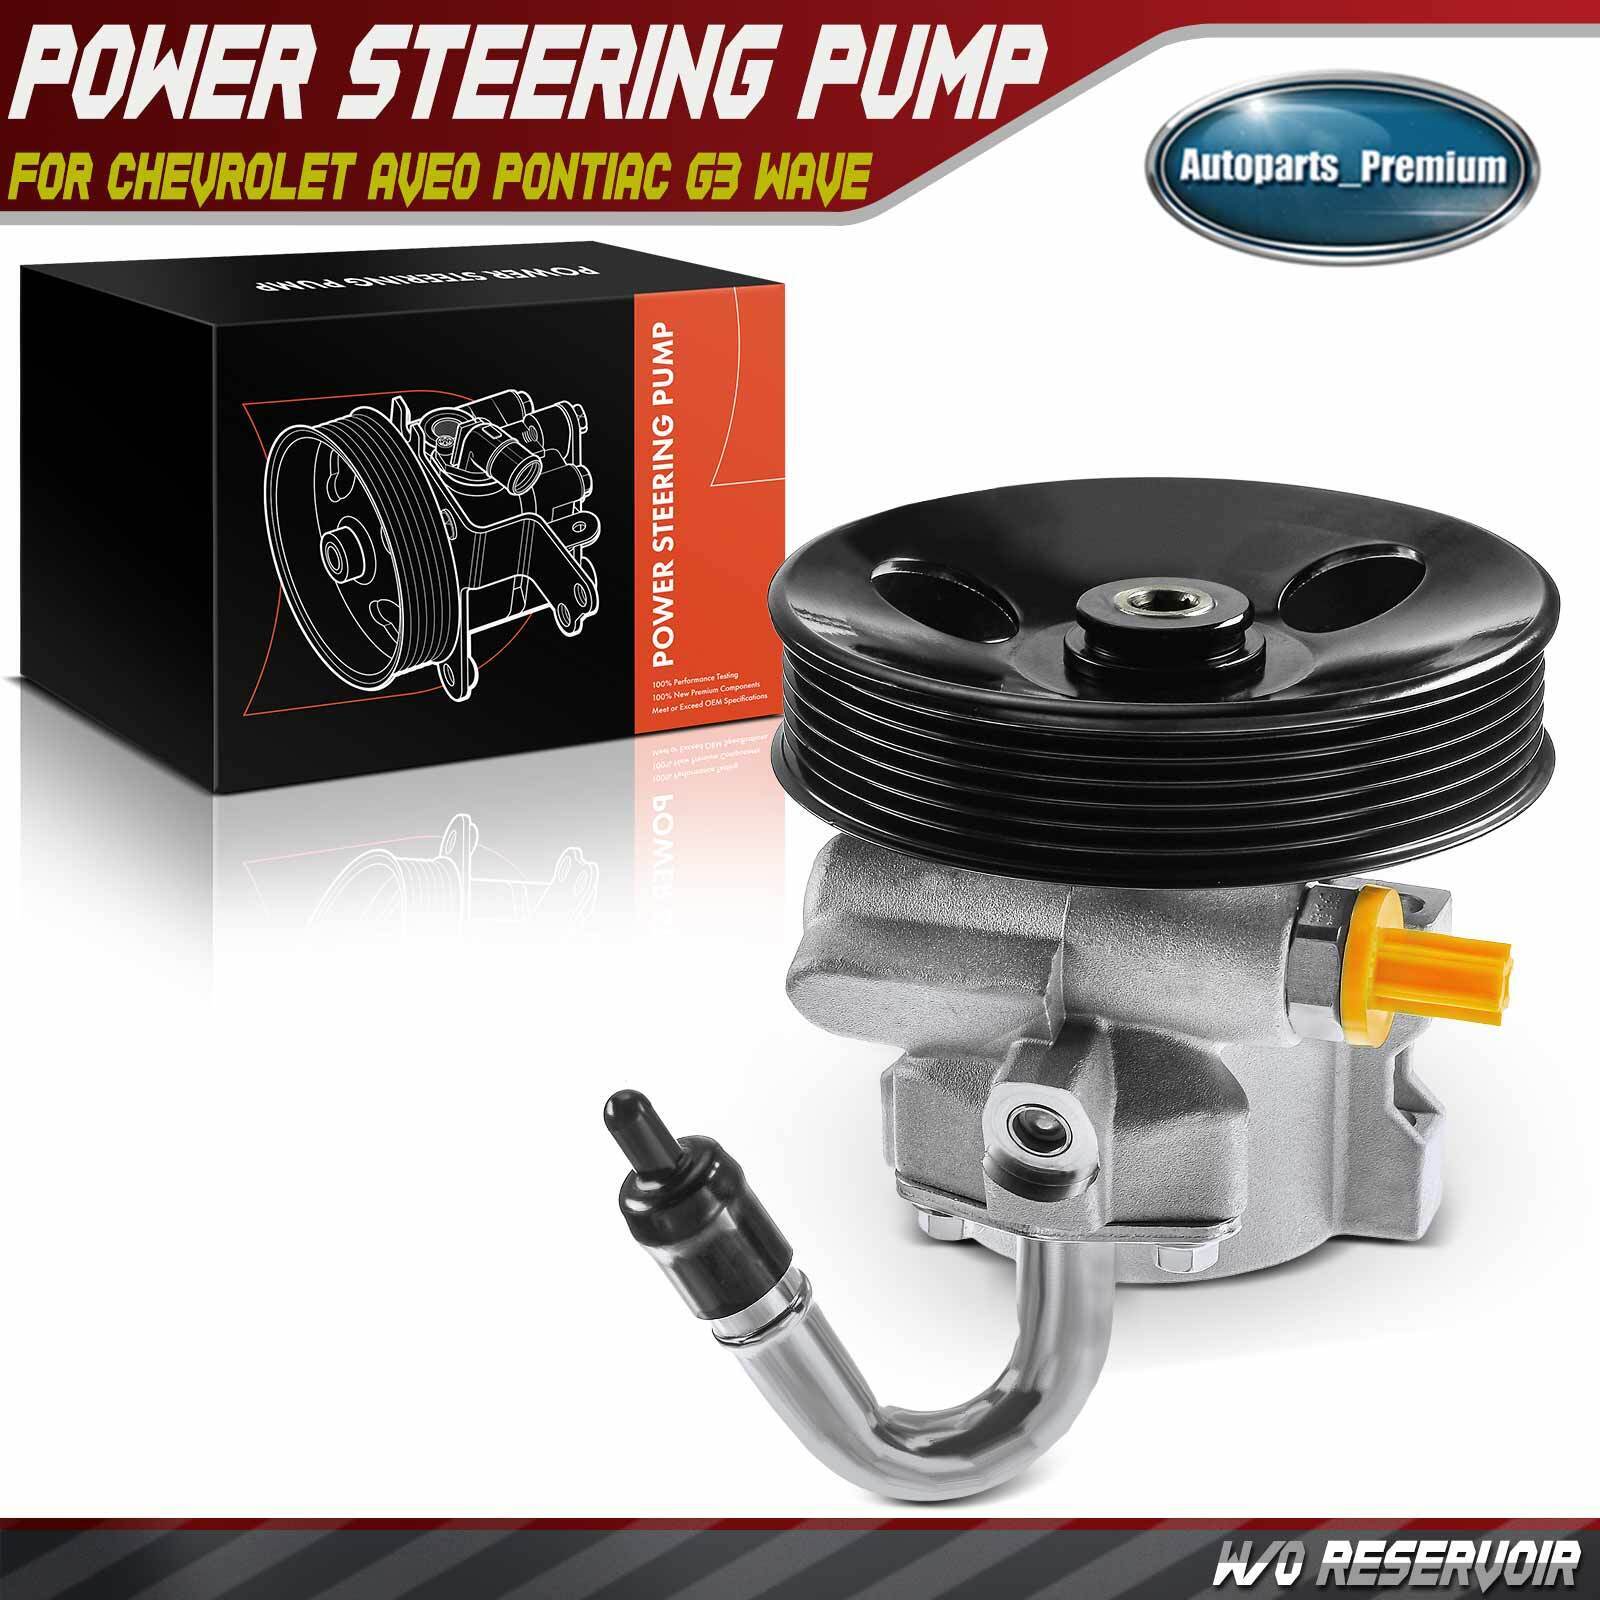 Power Steering Pump w/ Pulley for Chevrolet Aveo Pontiac G3 Wave l4 1.6L 20-806